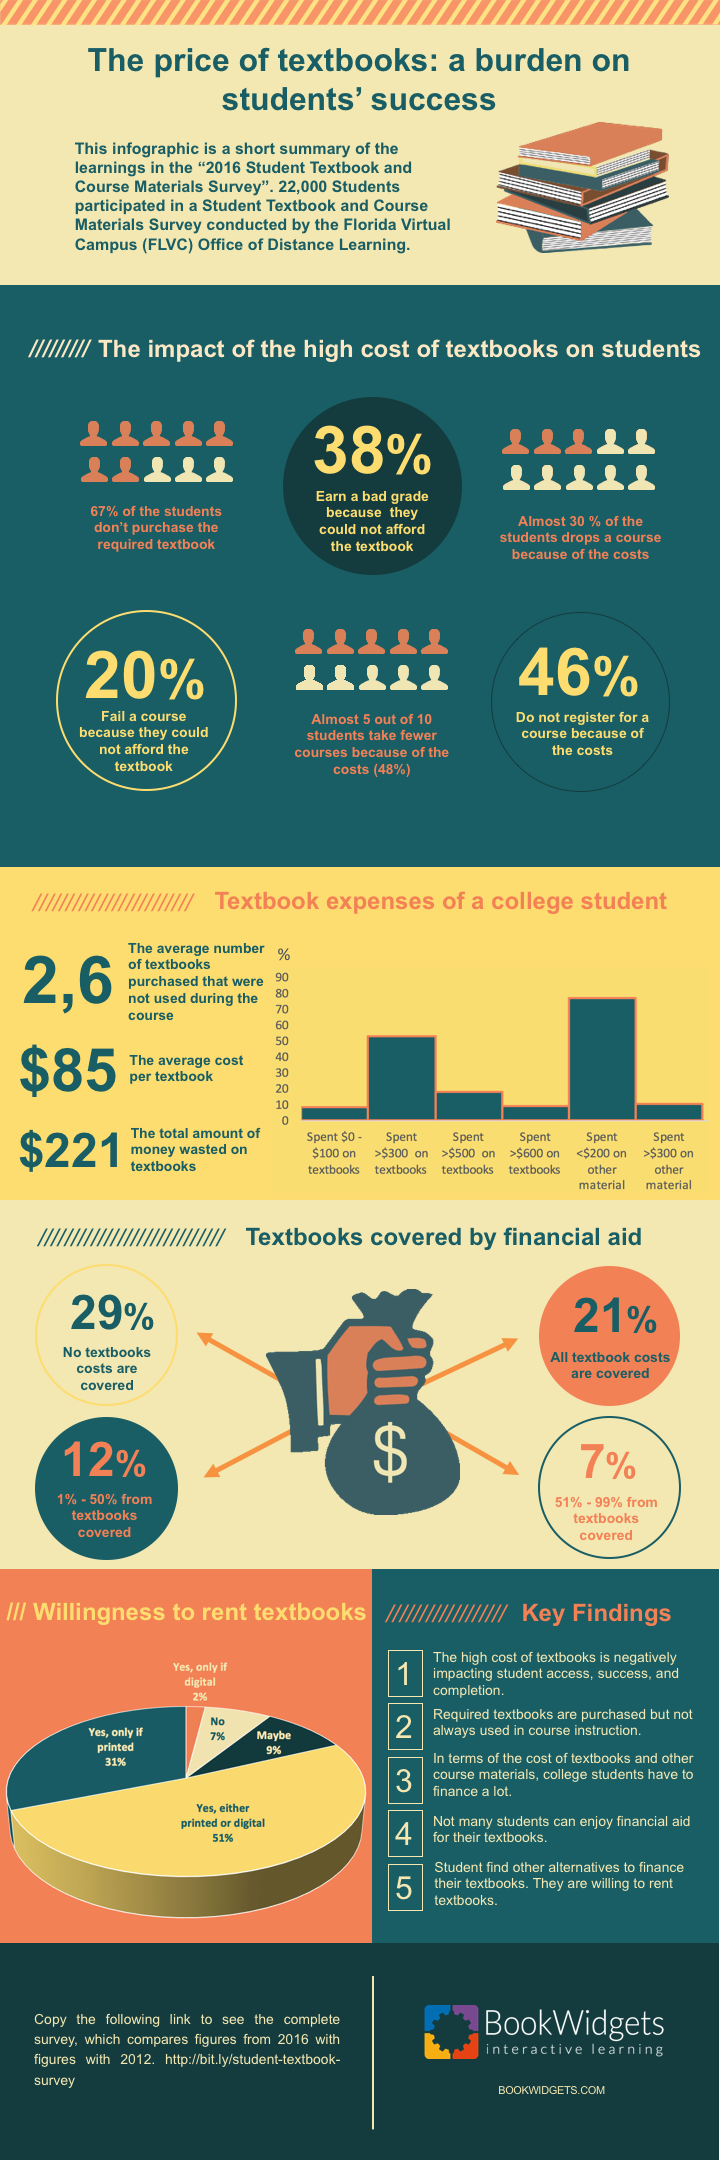 Infographic on how the costs of textbooks have a huge impact on students